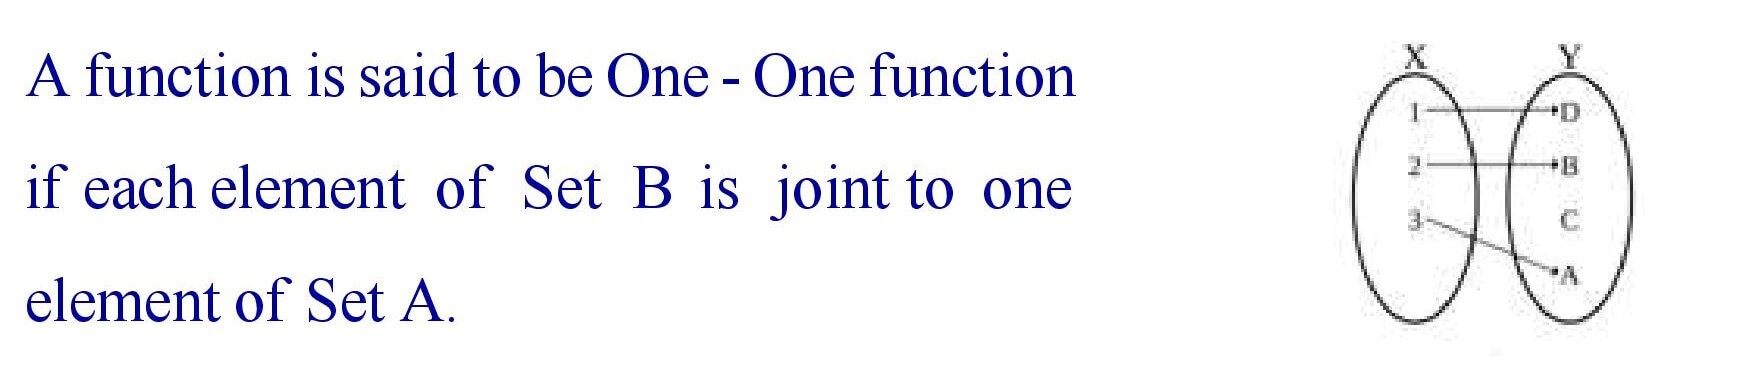 One - One function (Injective function)